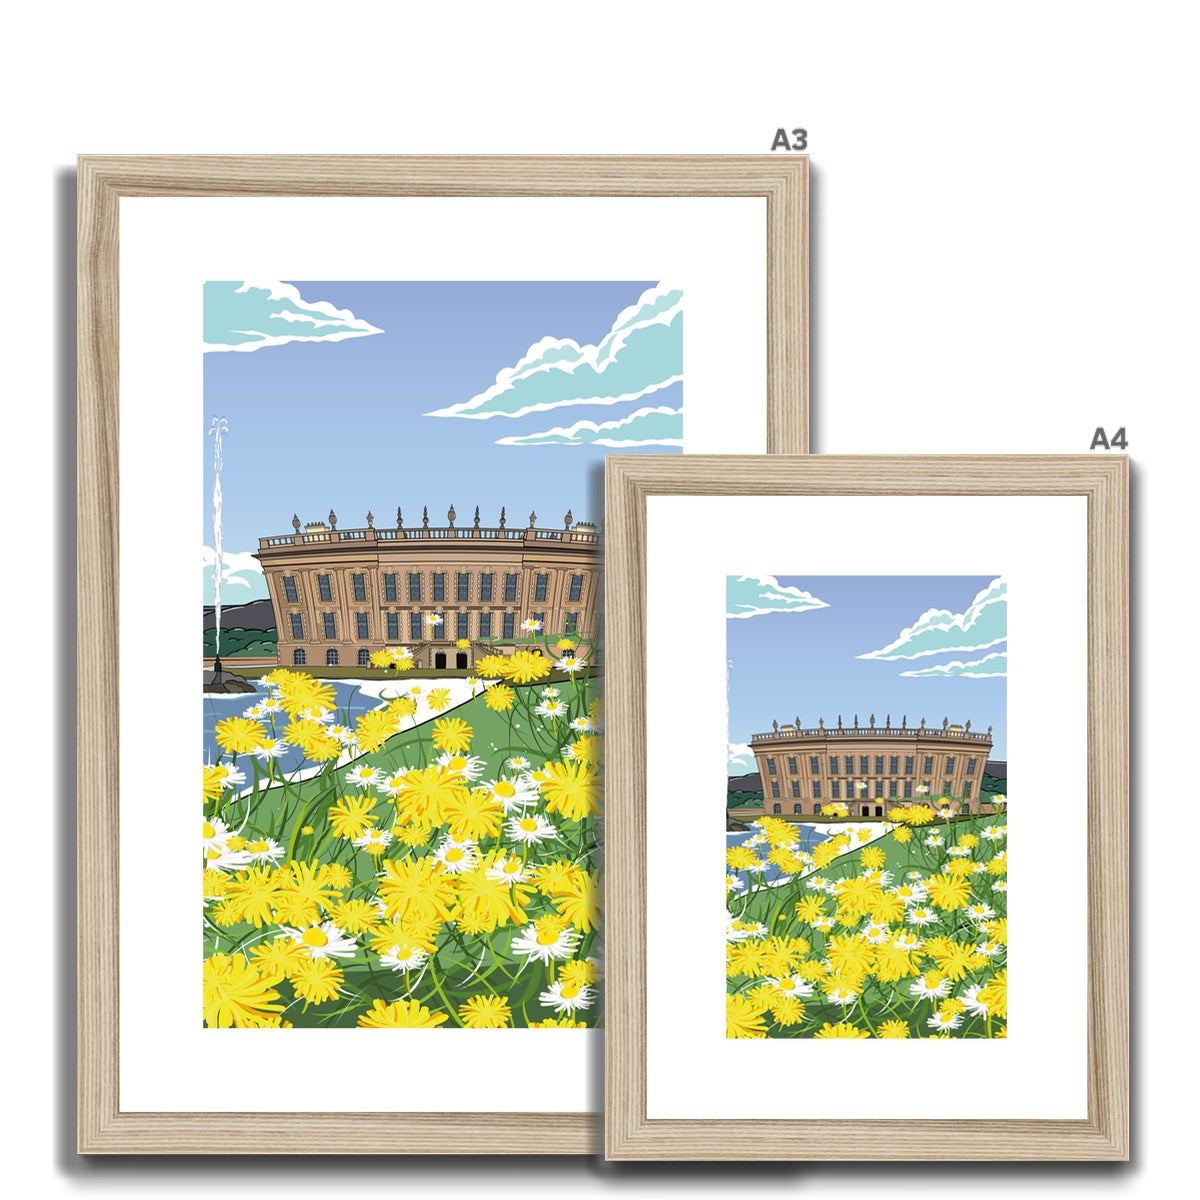 Chatsworth - In Bloom Framed & Mounted Print